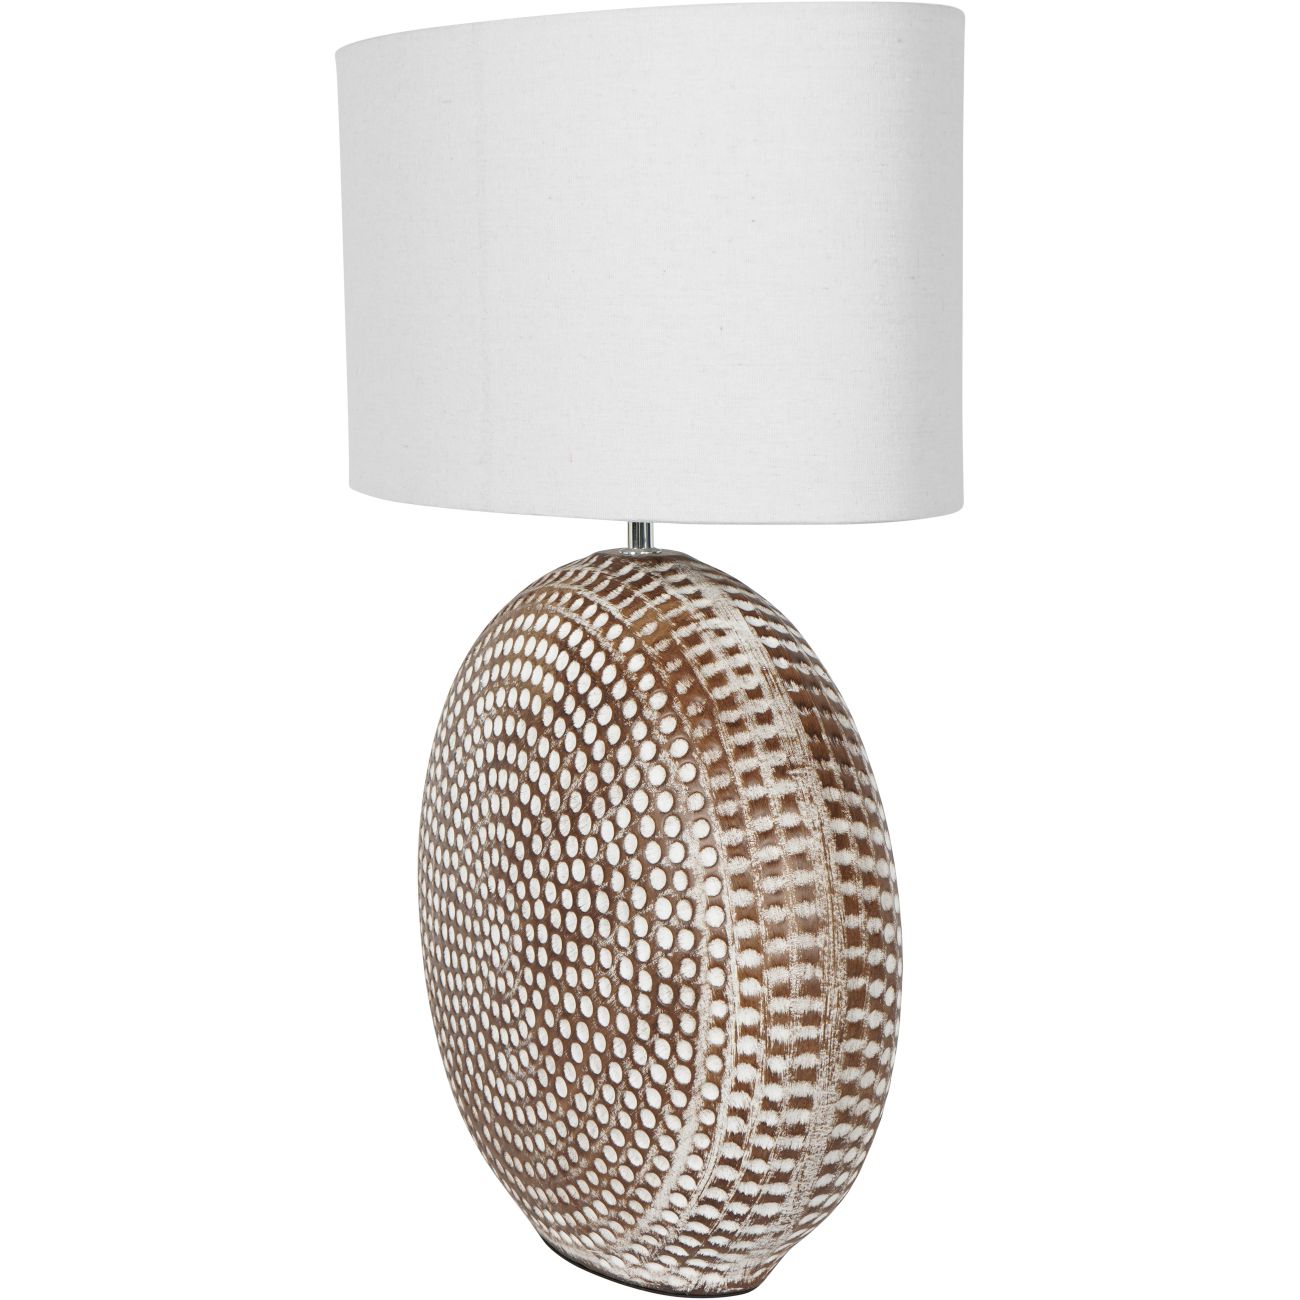 Libra Brown Ceramic Lamp - 65cm with Ivory Oval Drum Shade